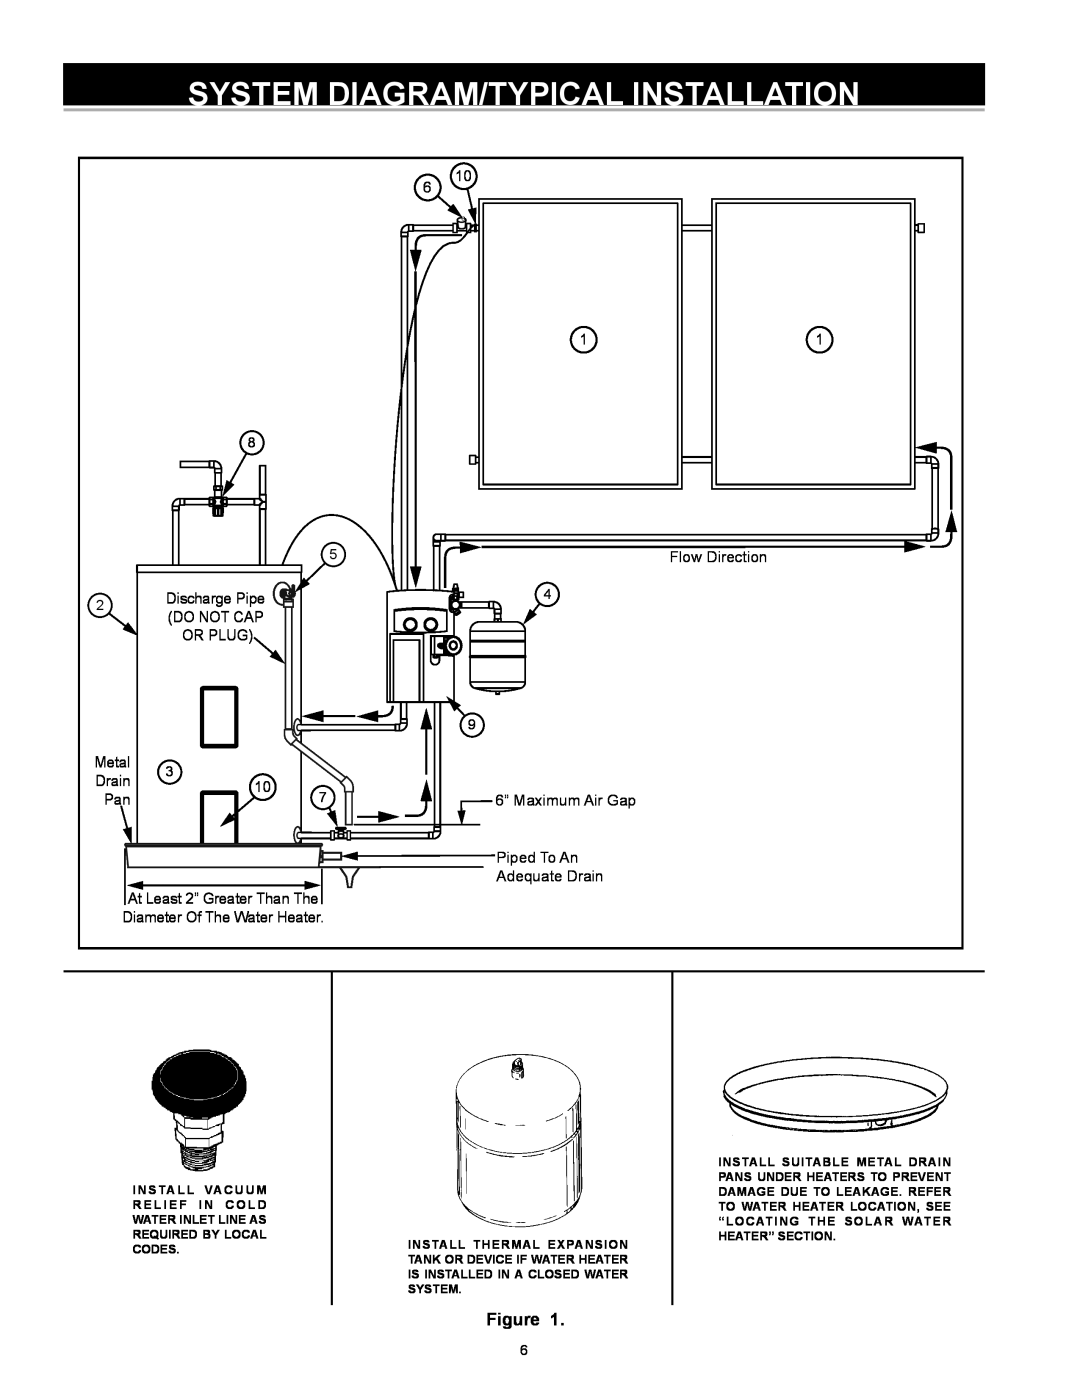 American Water Heater 318281-000 System Diagram/Typical Installation, Discharge Pipe, Do Not Cap, Or Plug, Piped To An 